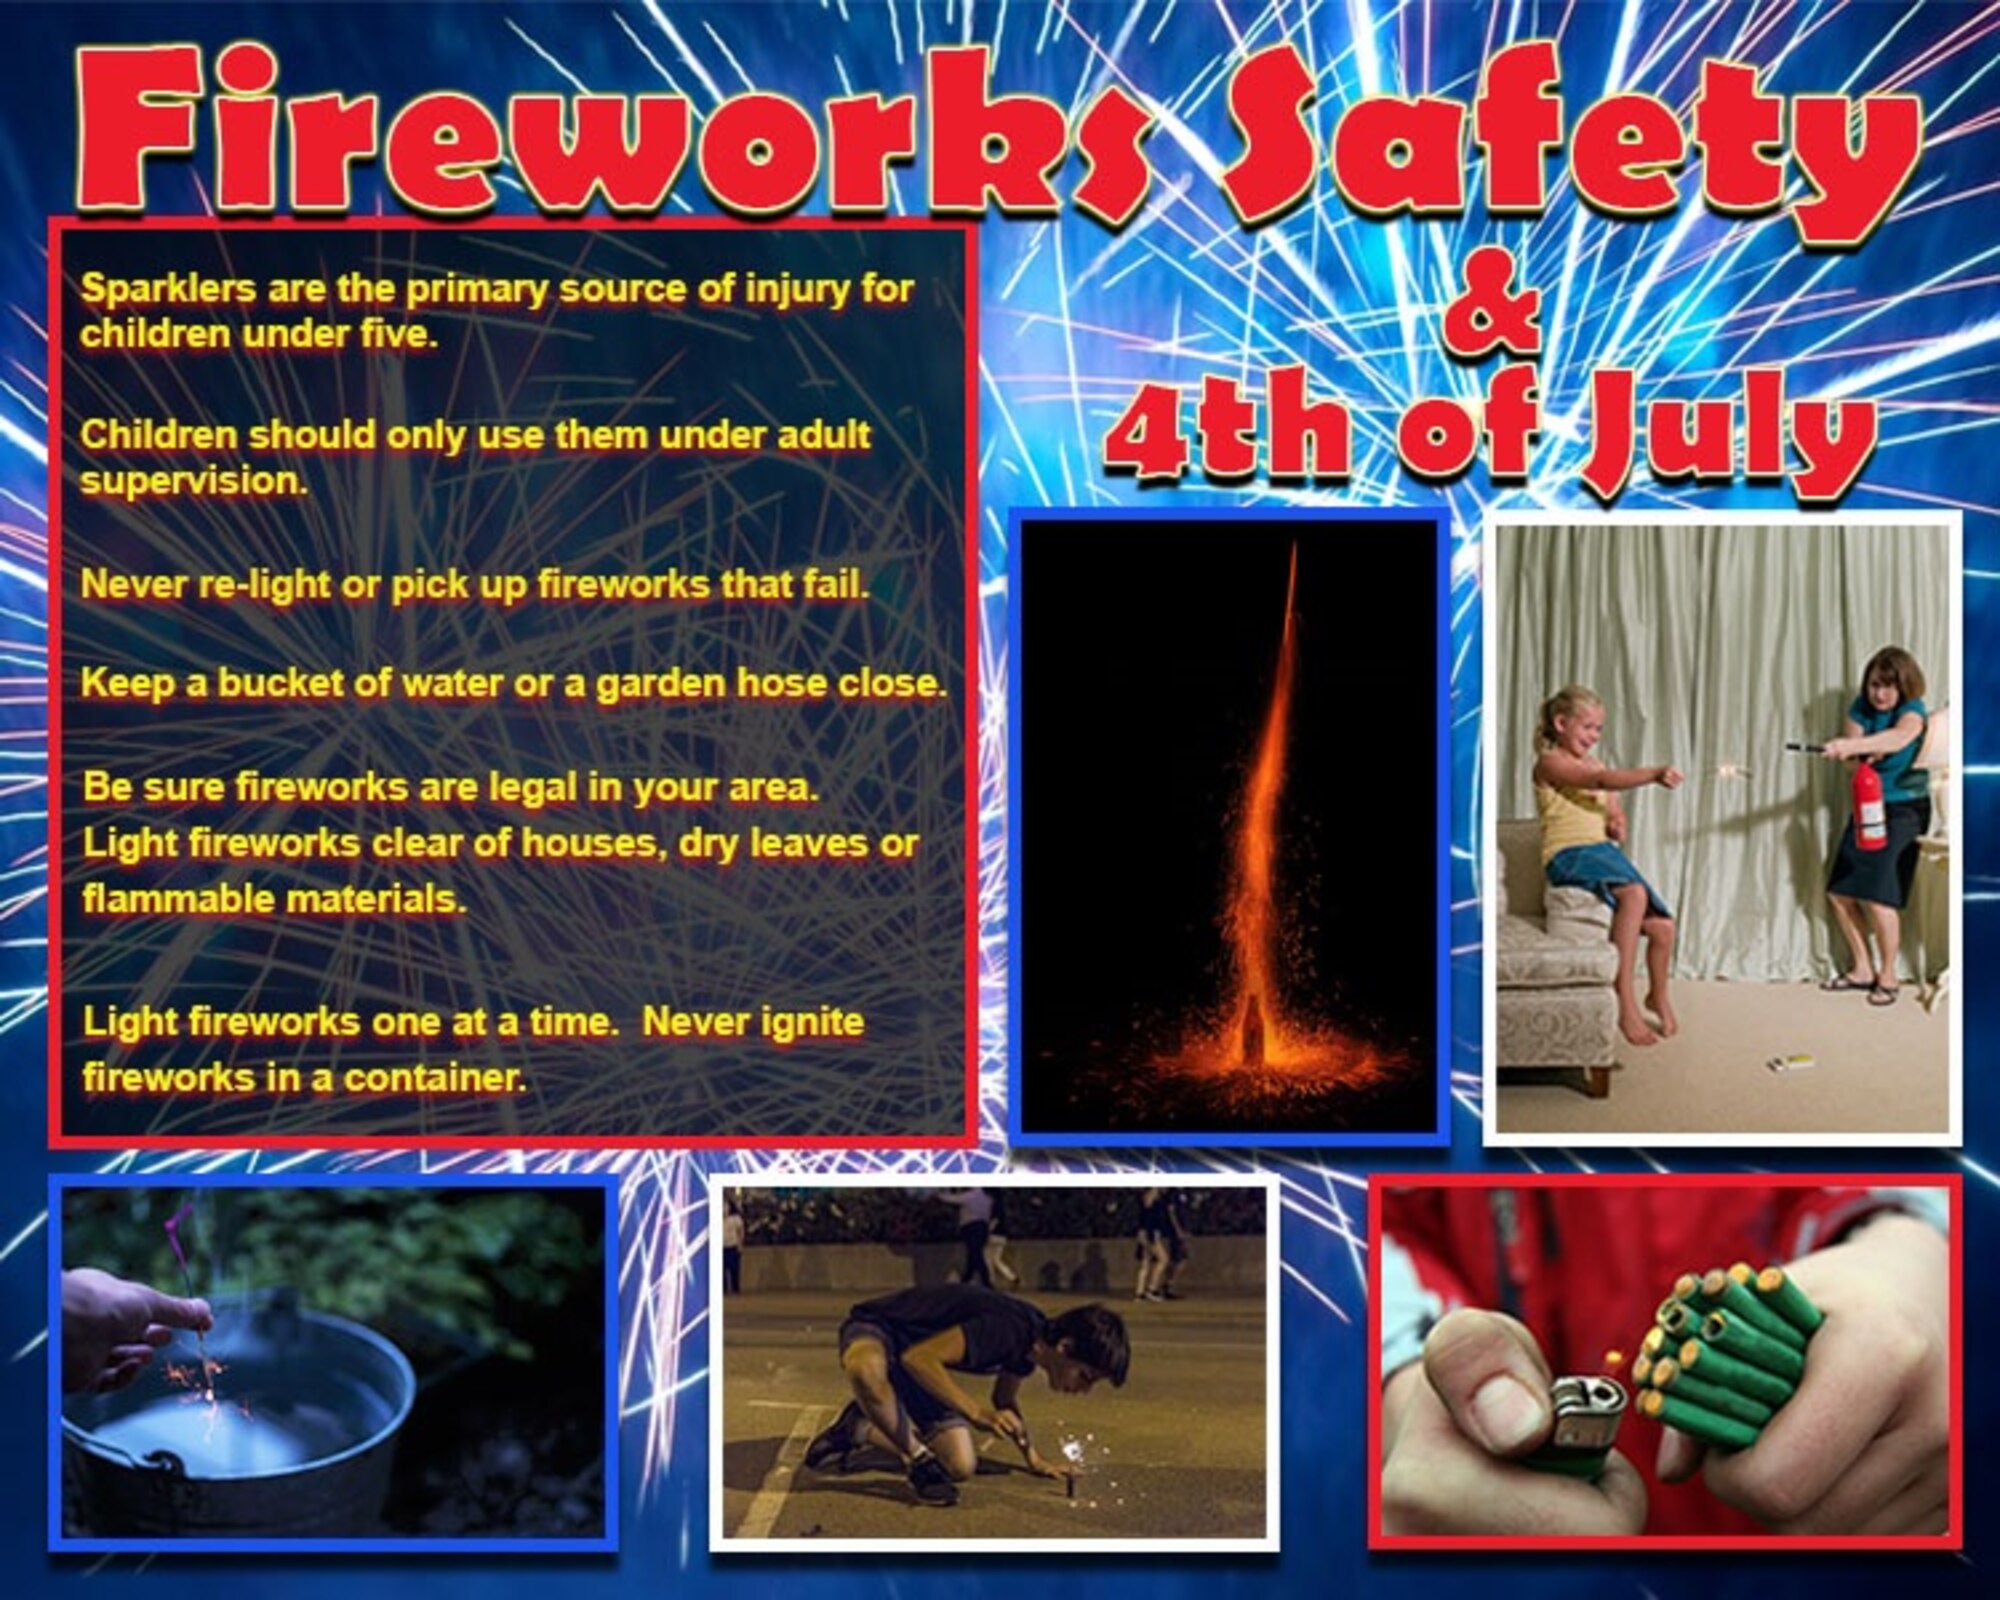 Fireworks are used to commemorate the Fourth of July. However, they are not safe in the hands of consumers. Fireworks initiate thousands of burns and eye injuries each year. 